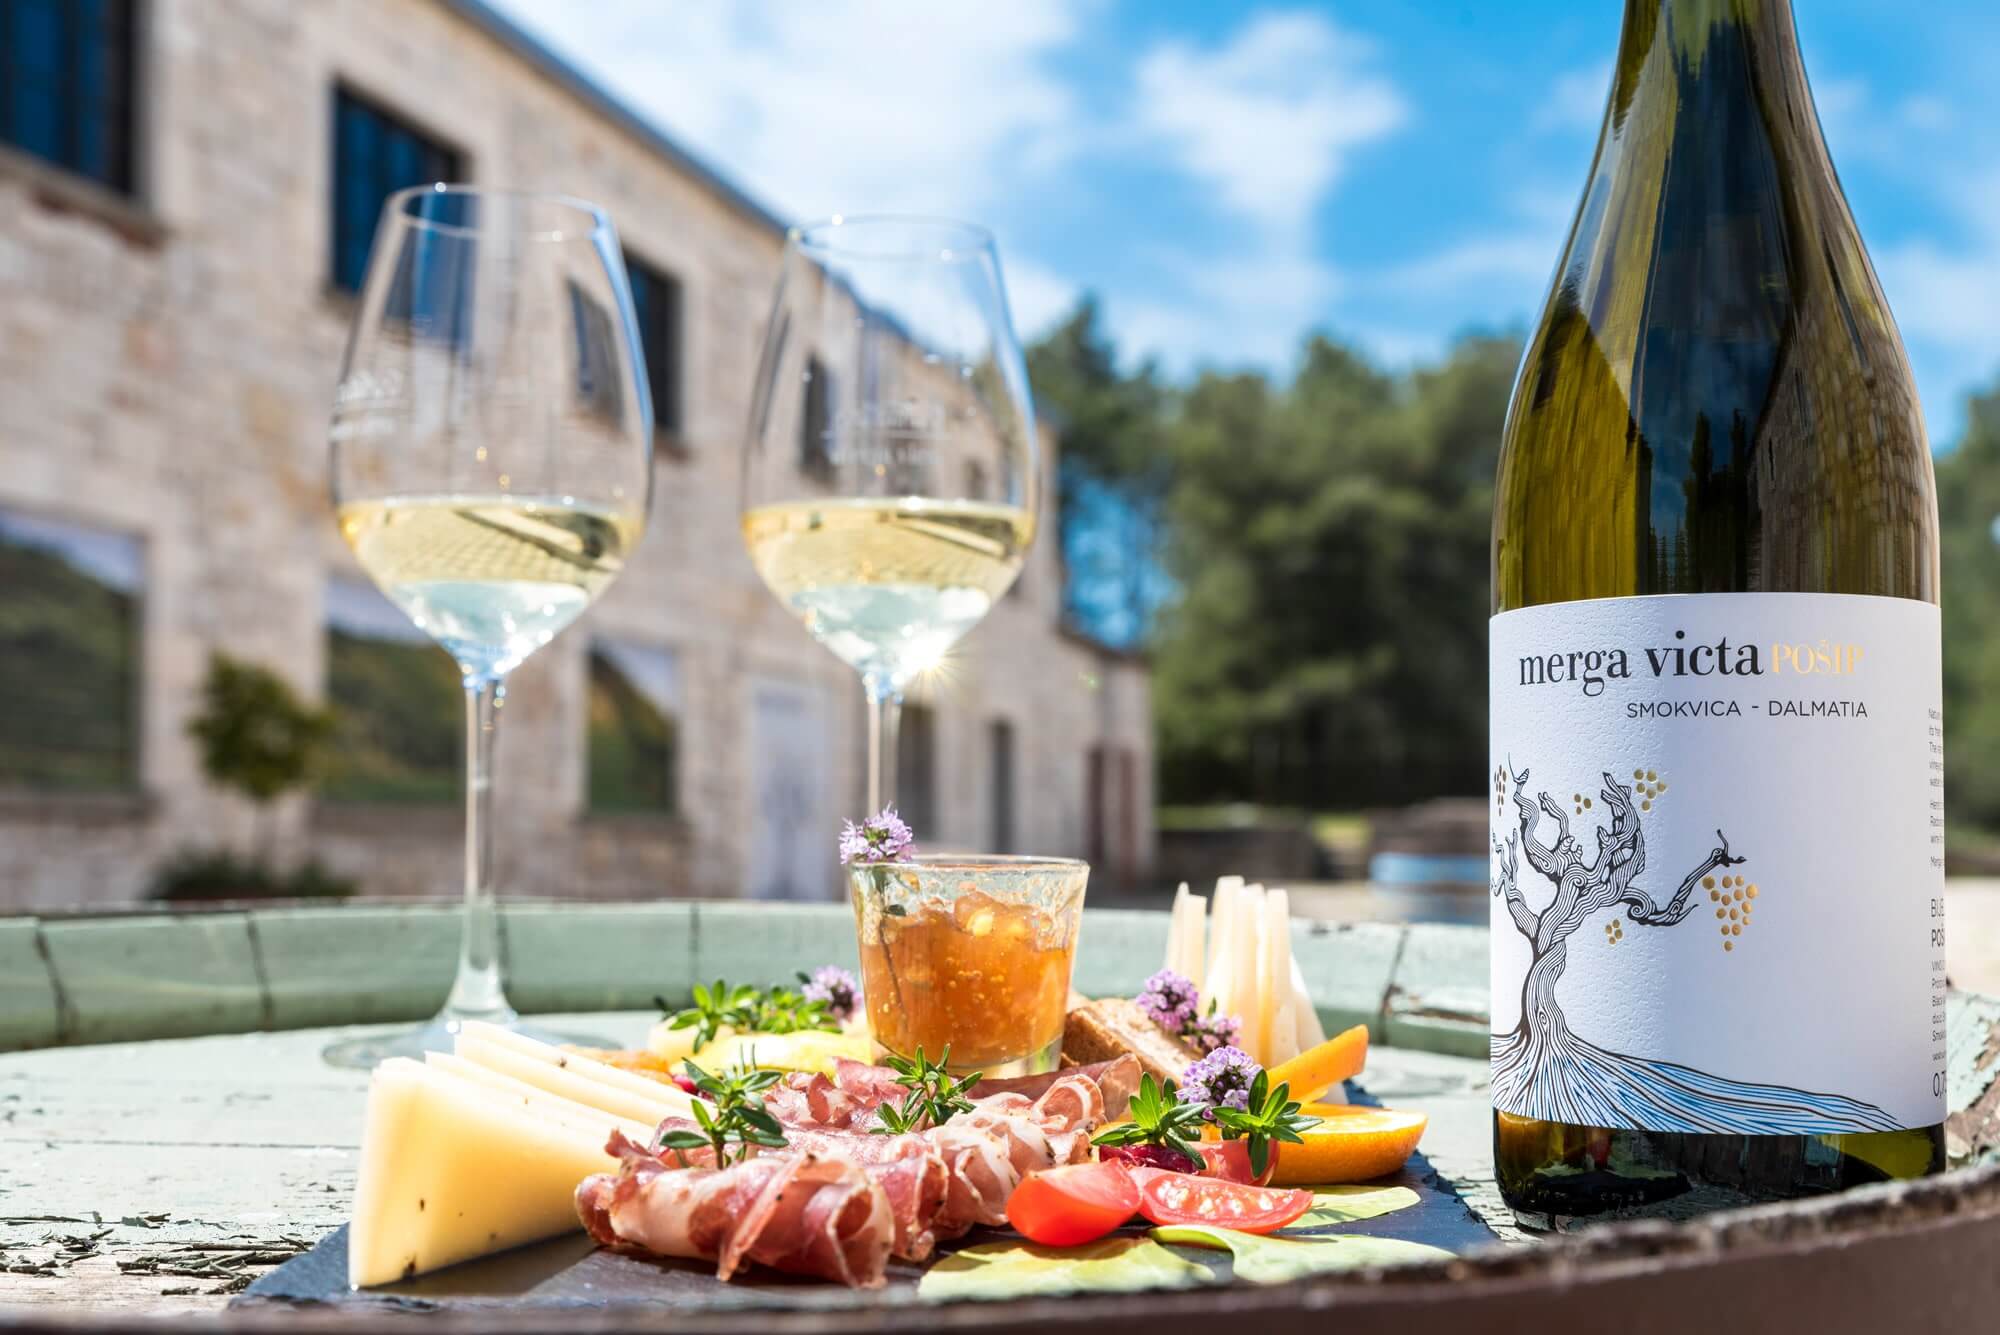 Image of a food and wine served on the outside terrace of Black Island Winery